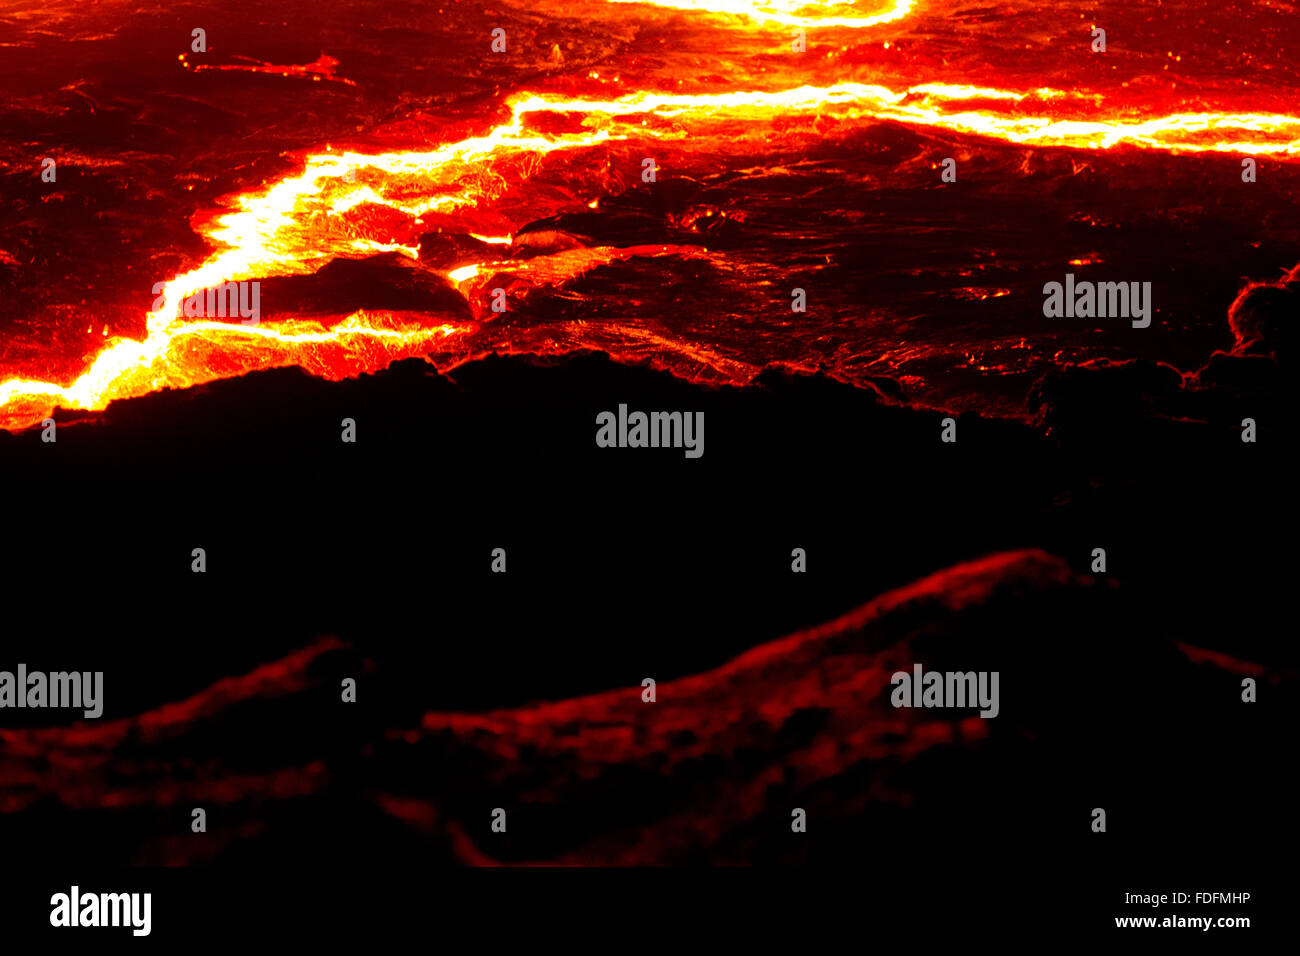 Bright lines show the cracks in the moving surface of Erta Ale's lava lake Stock Photo